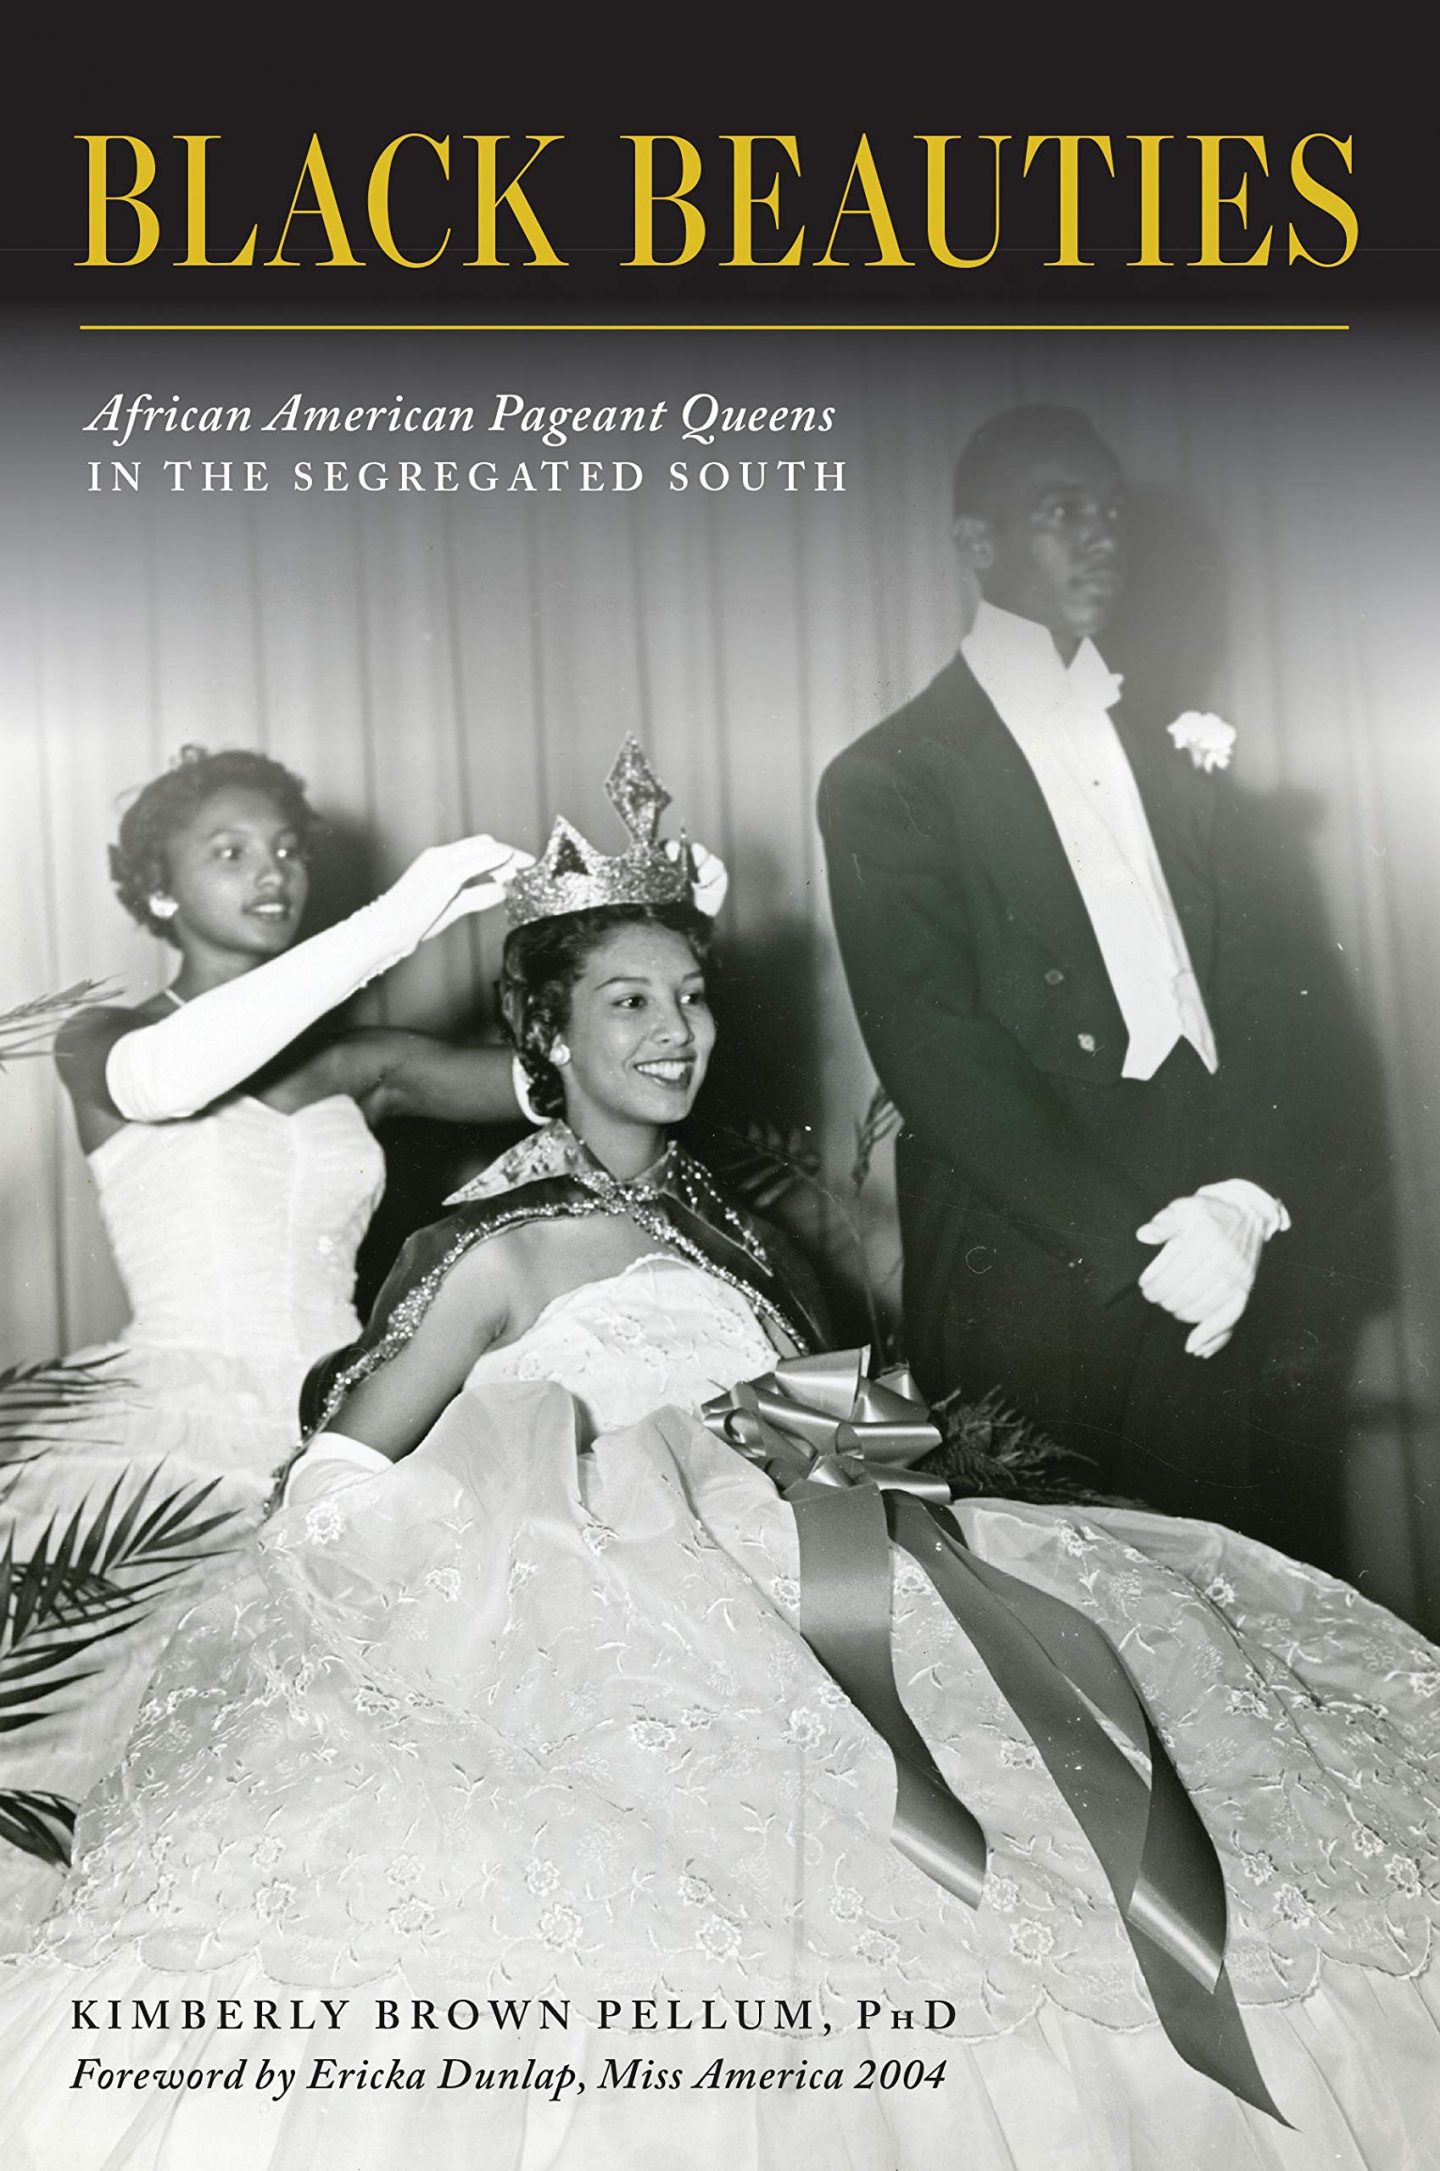 HBCU Alum releases “Black Beauties: African American Pageant Queens in the Segregated South”